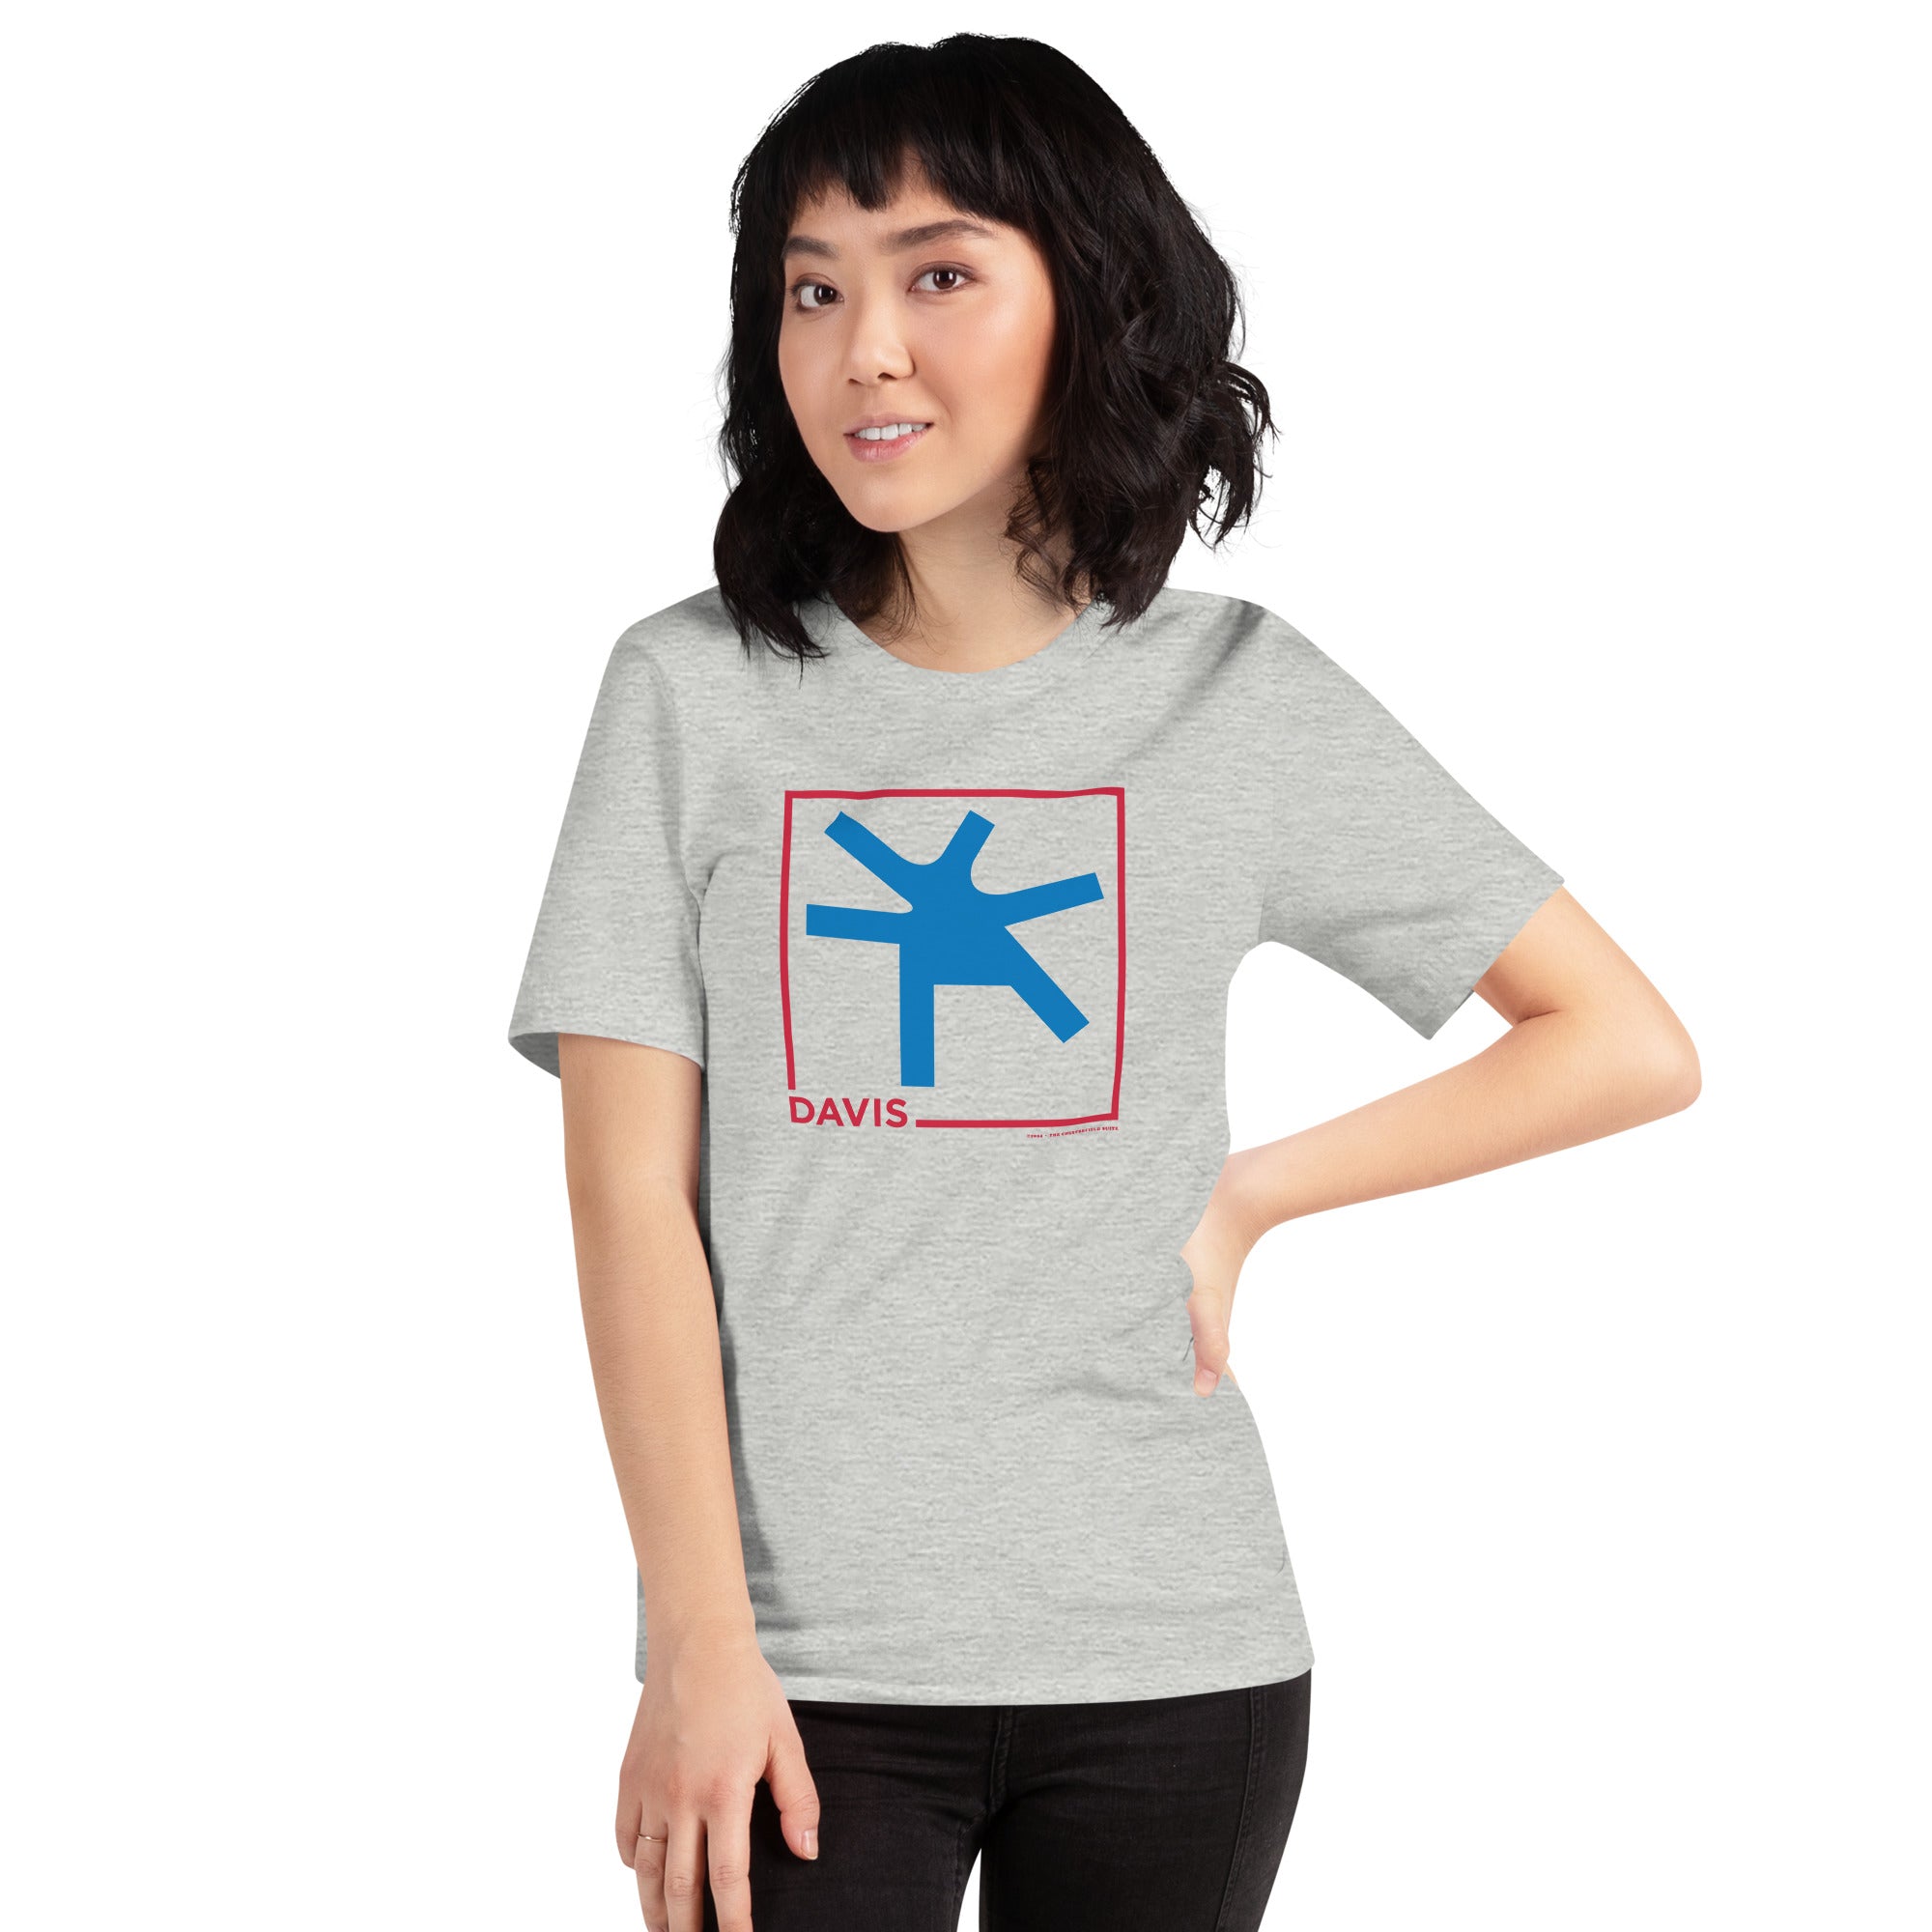 woman wearing Grey unisex t-shirt with the word Davis and a square in red, with the blue intersection